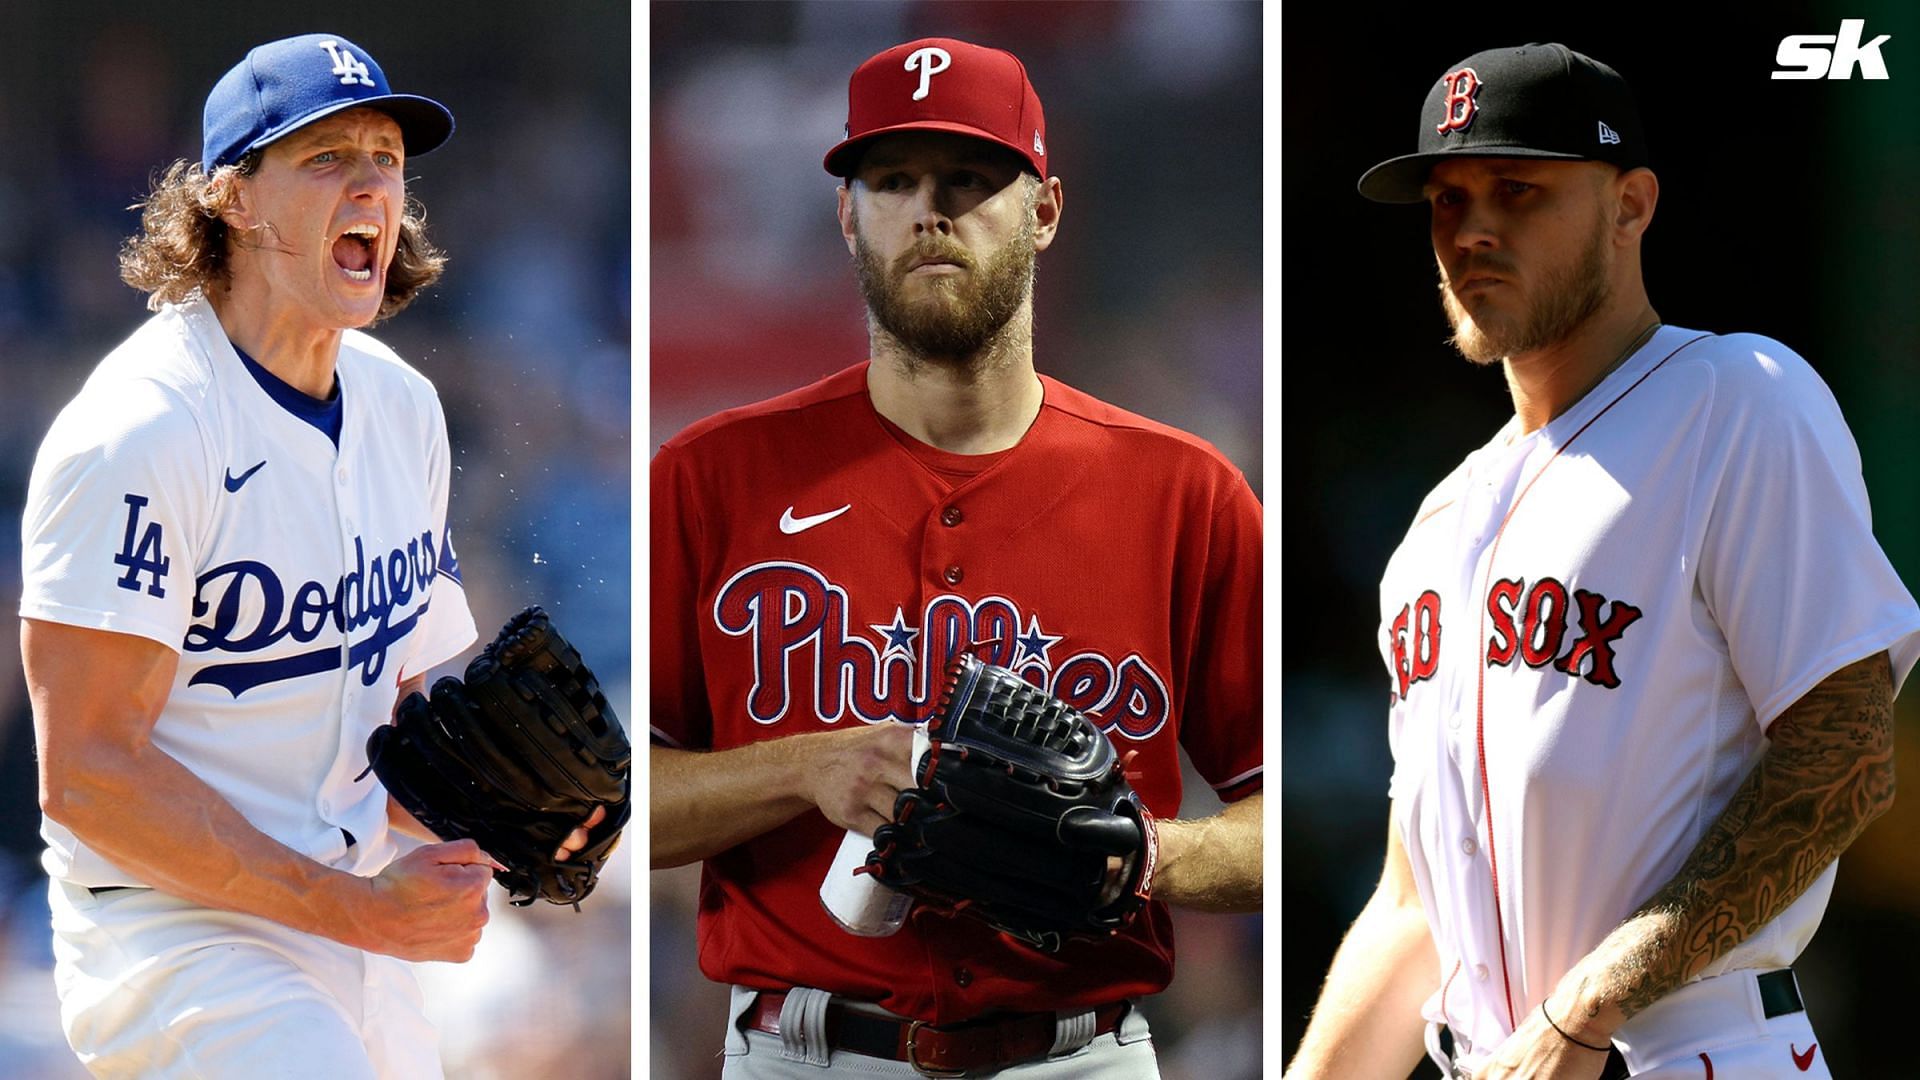 MLB Power Rankings: Listing the top 5 starting pitchers as Week 6 end approaches